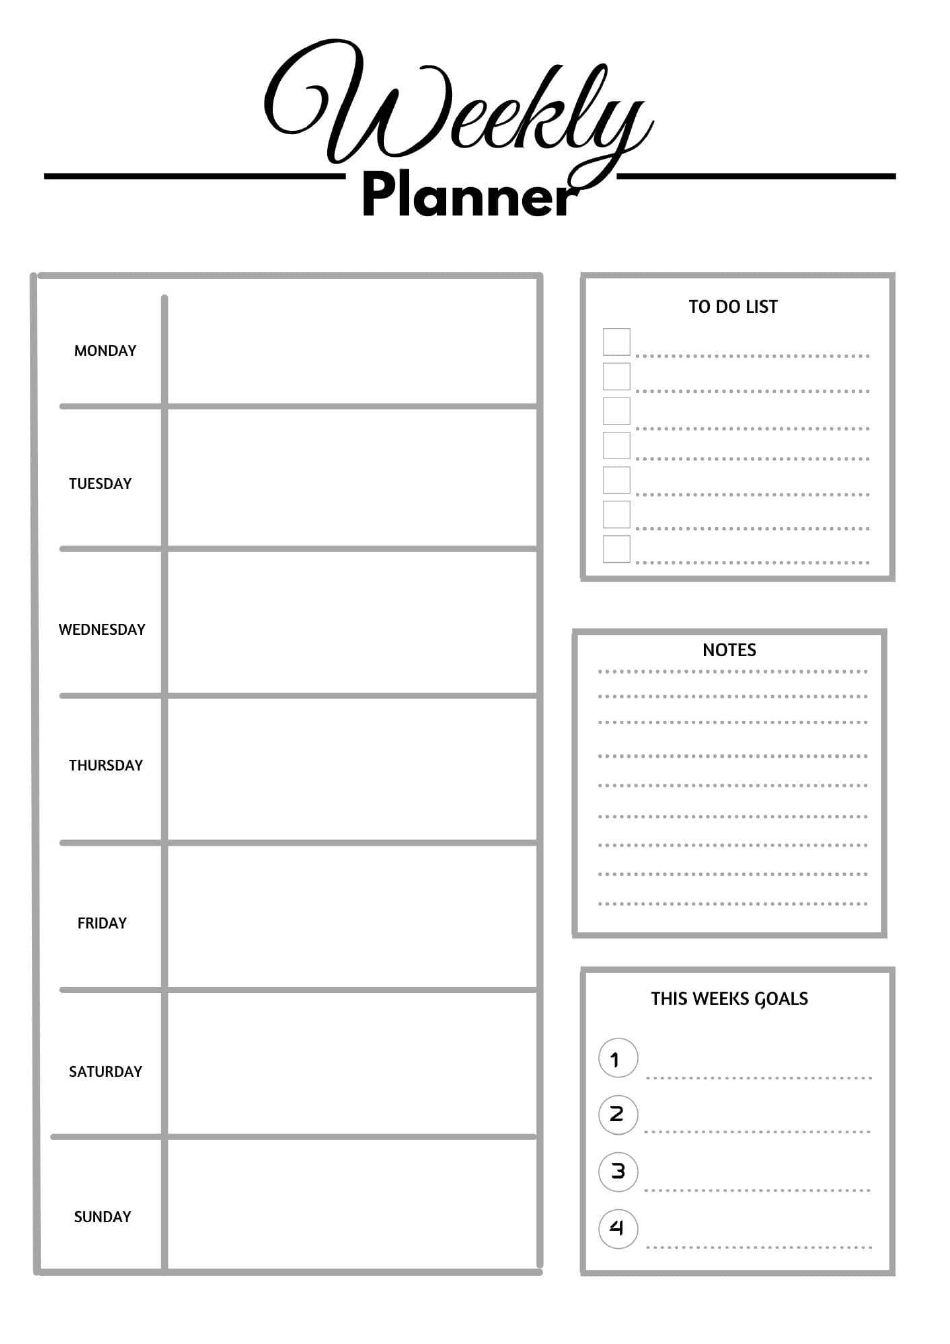 Weekly Planner Template Seven Days Download Printable Pdf Templateroller 1915